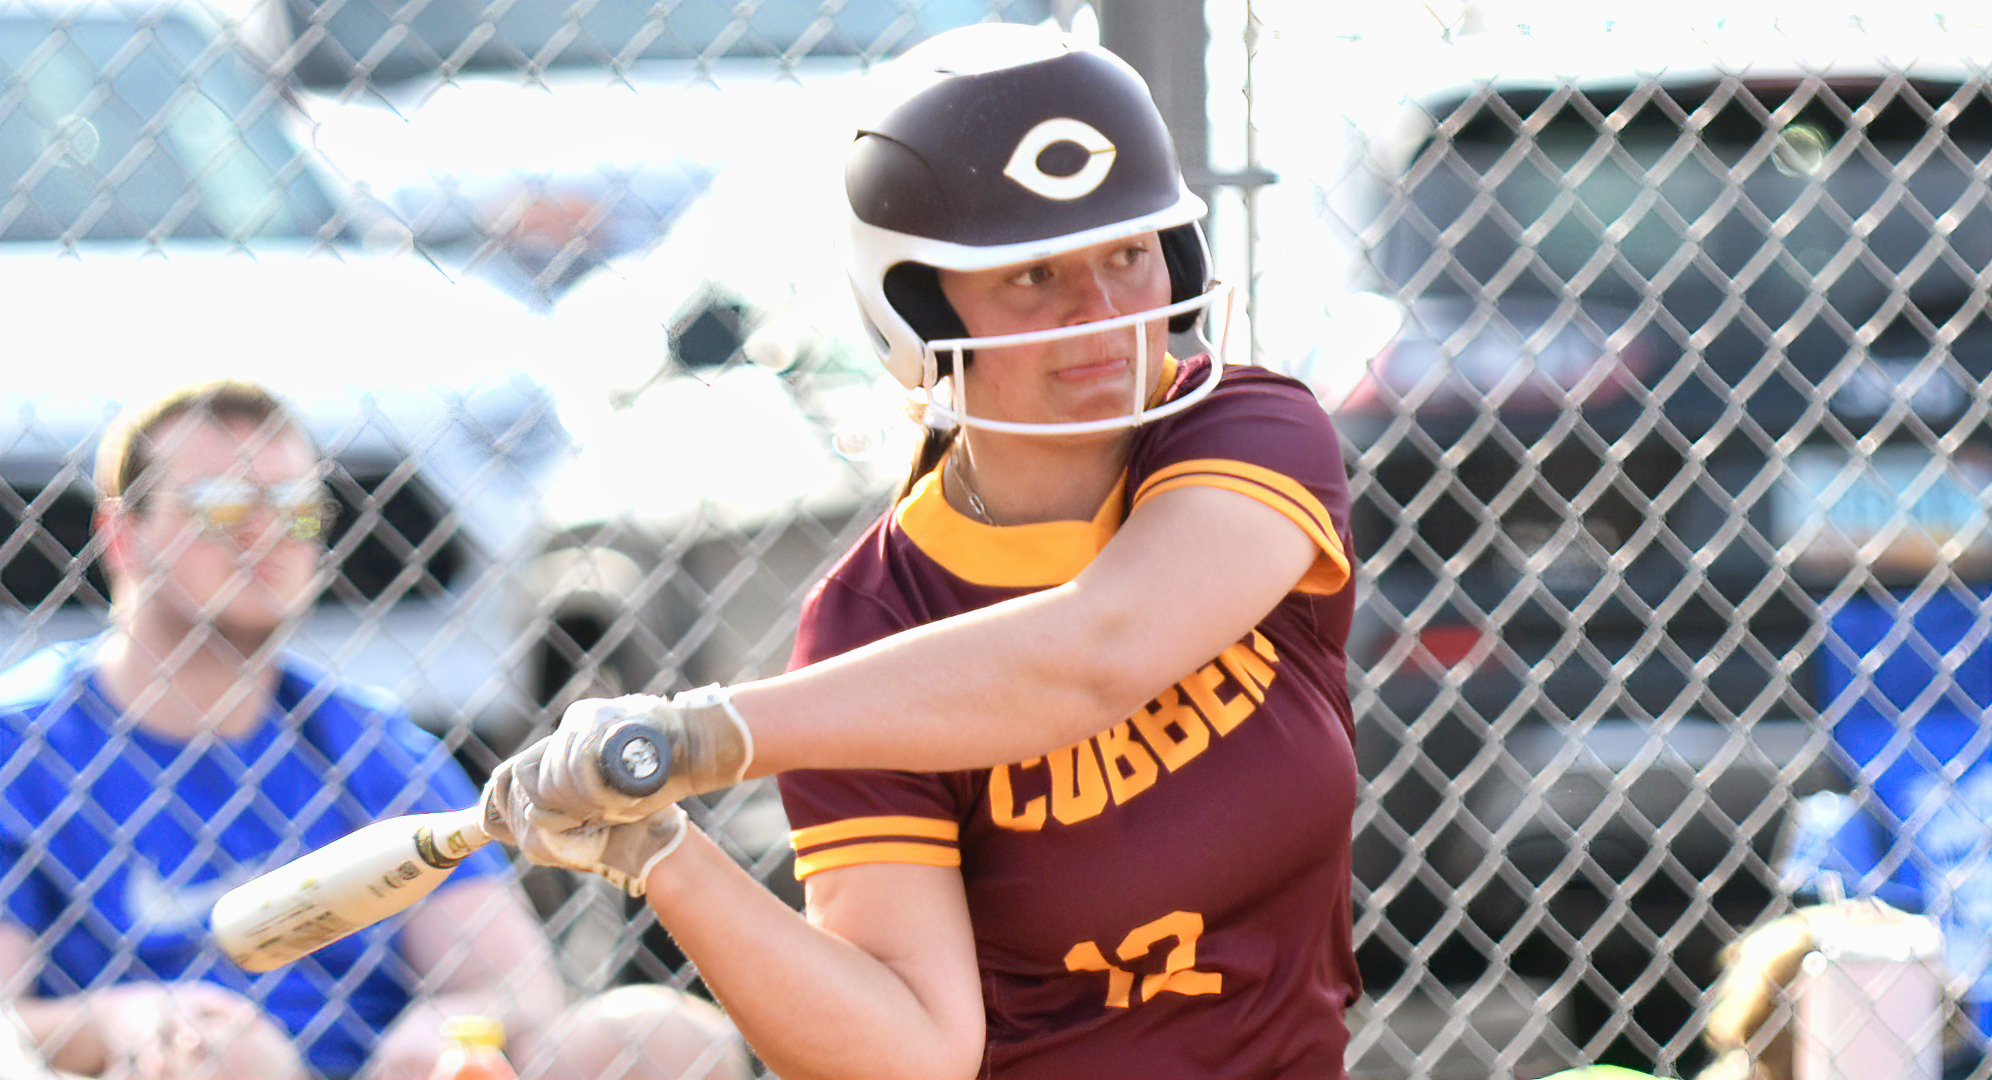 Senior Molly Wilde had a hit in both games of the Cobbers' first two games in Florida. She had two hits in the opener against Dubuque.